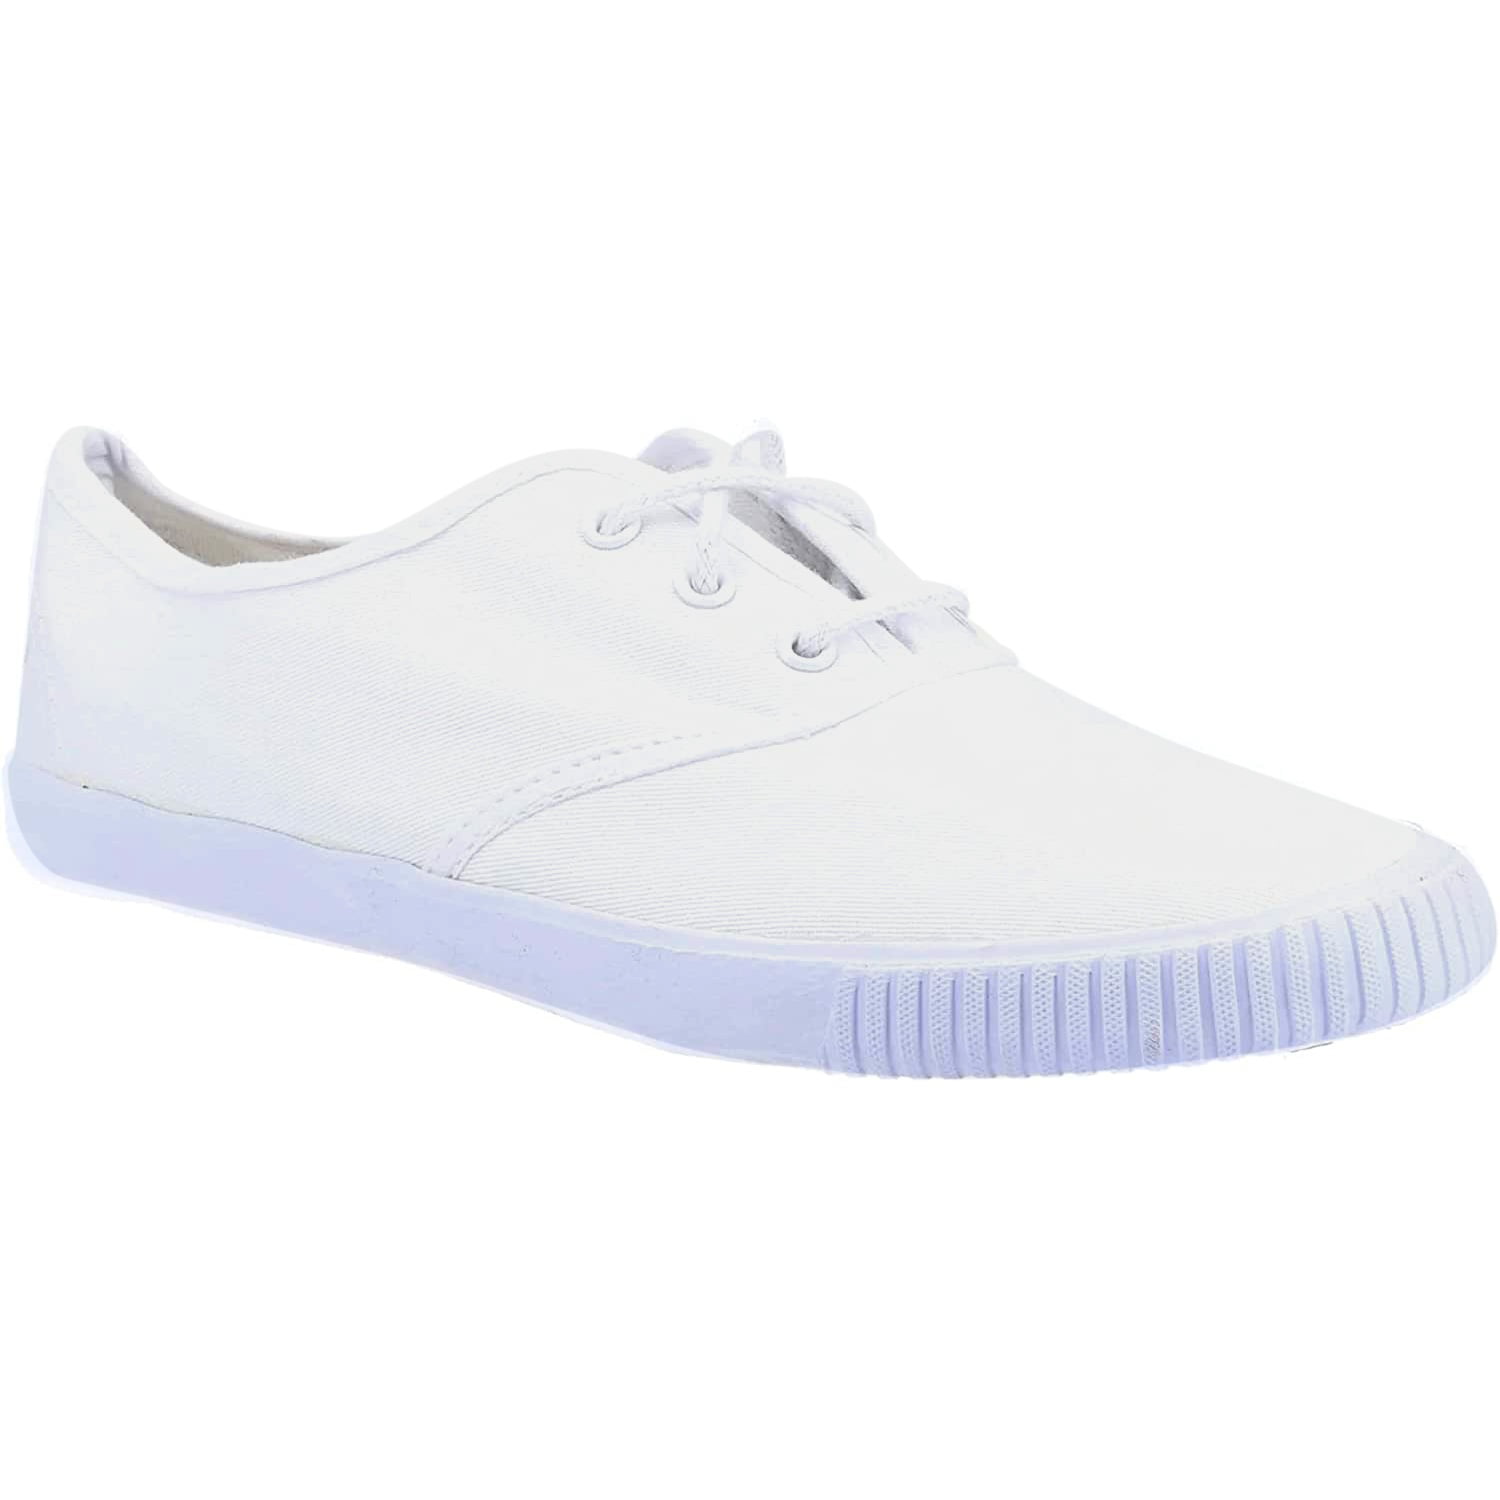 MENS LACE-UP WHITE CANVAS FLAT TRAINER PLIMSOLL PUMPS CASUAL SHOES SIZES 6-12 